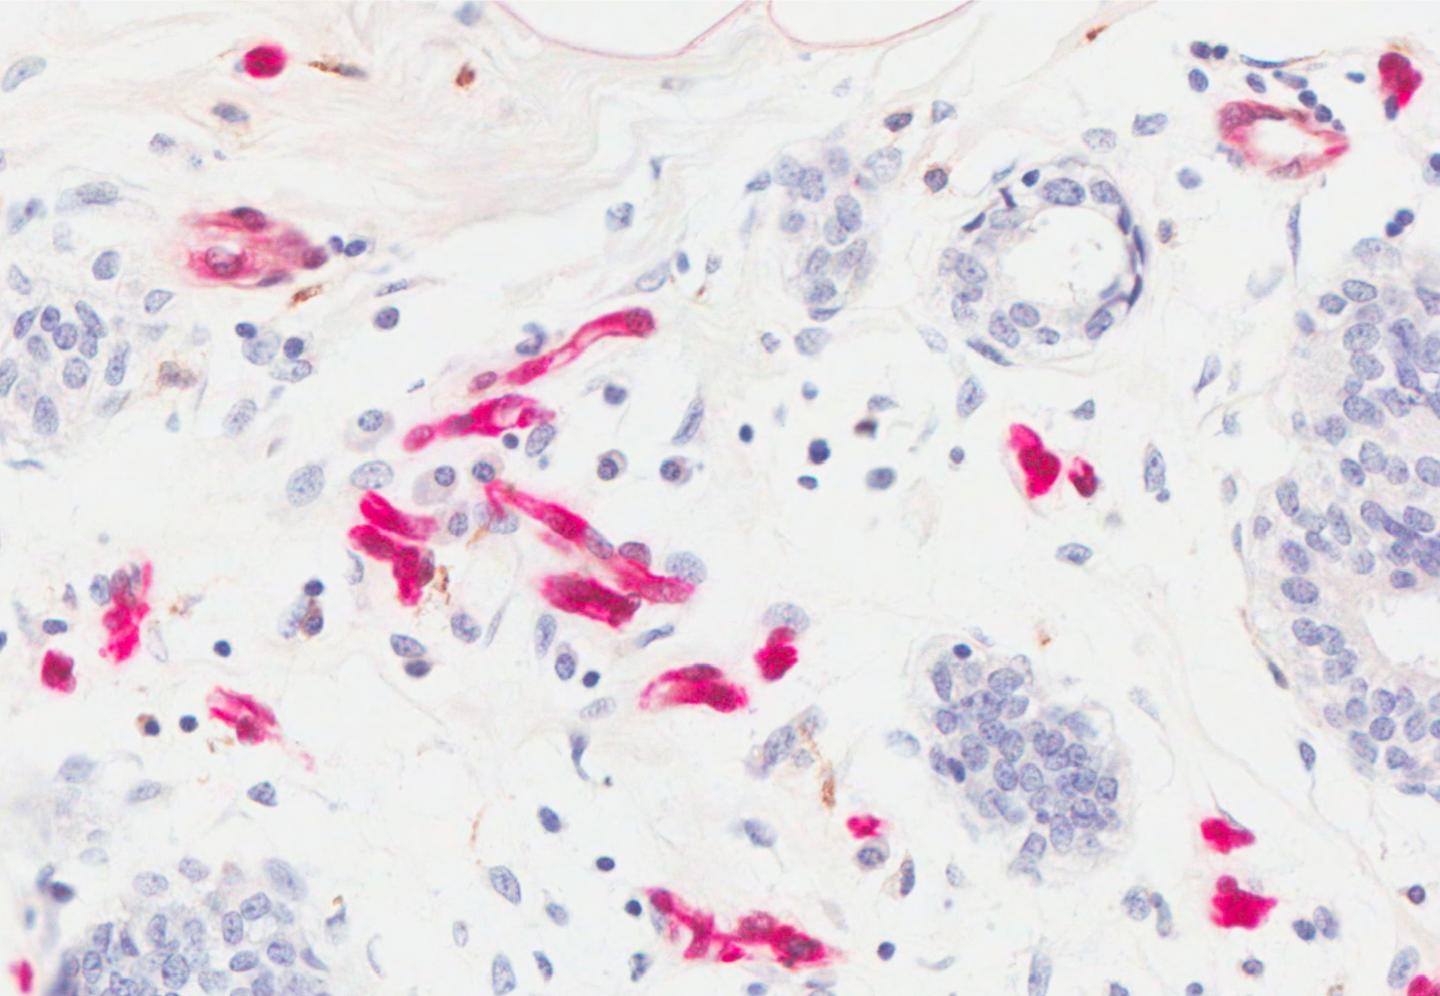 Adipose fatty acid binding protein (FABP4) in mammary glands